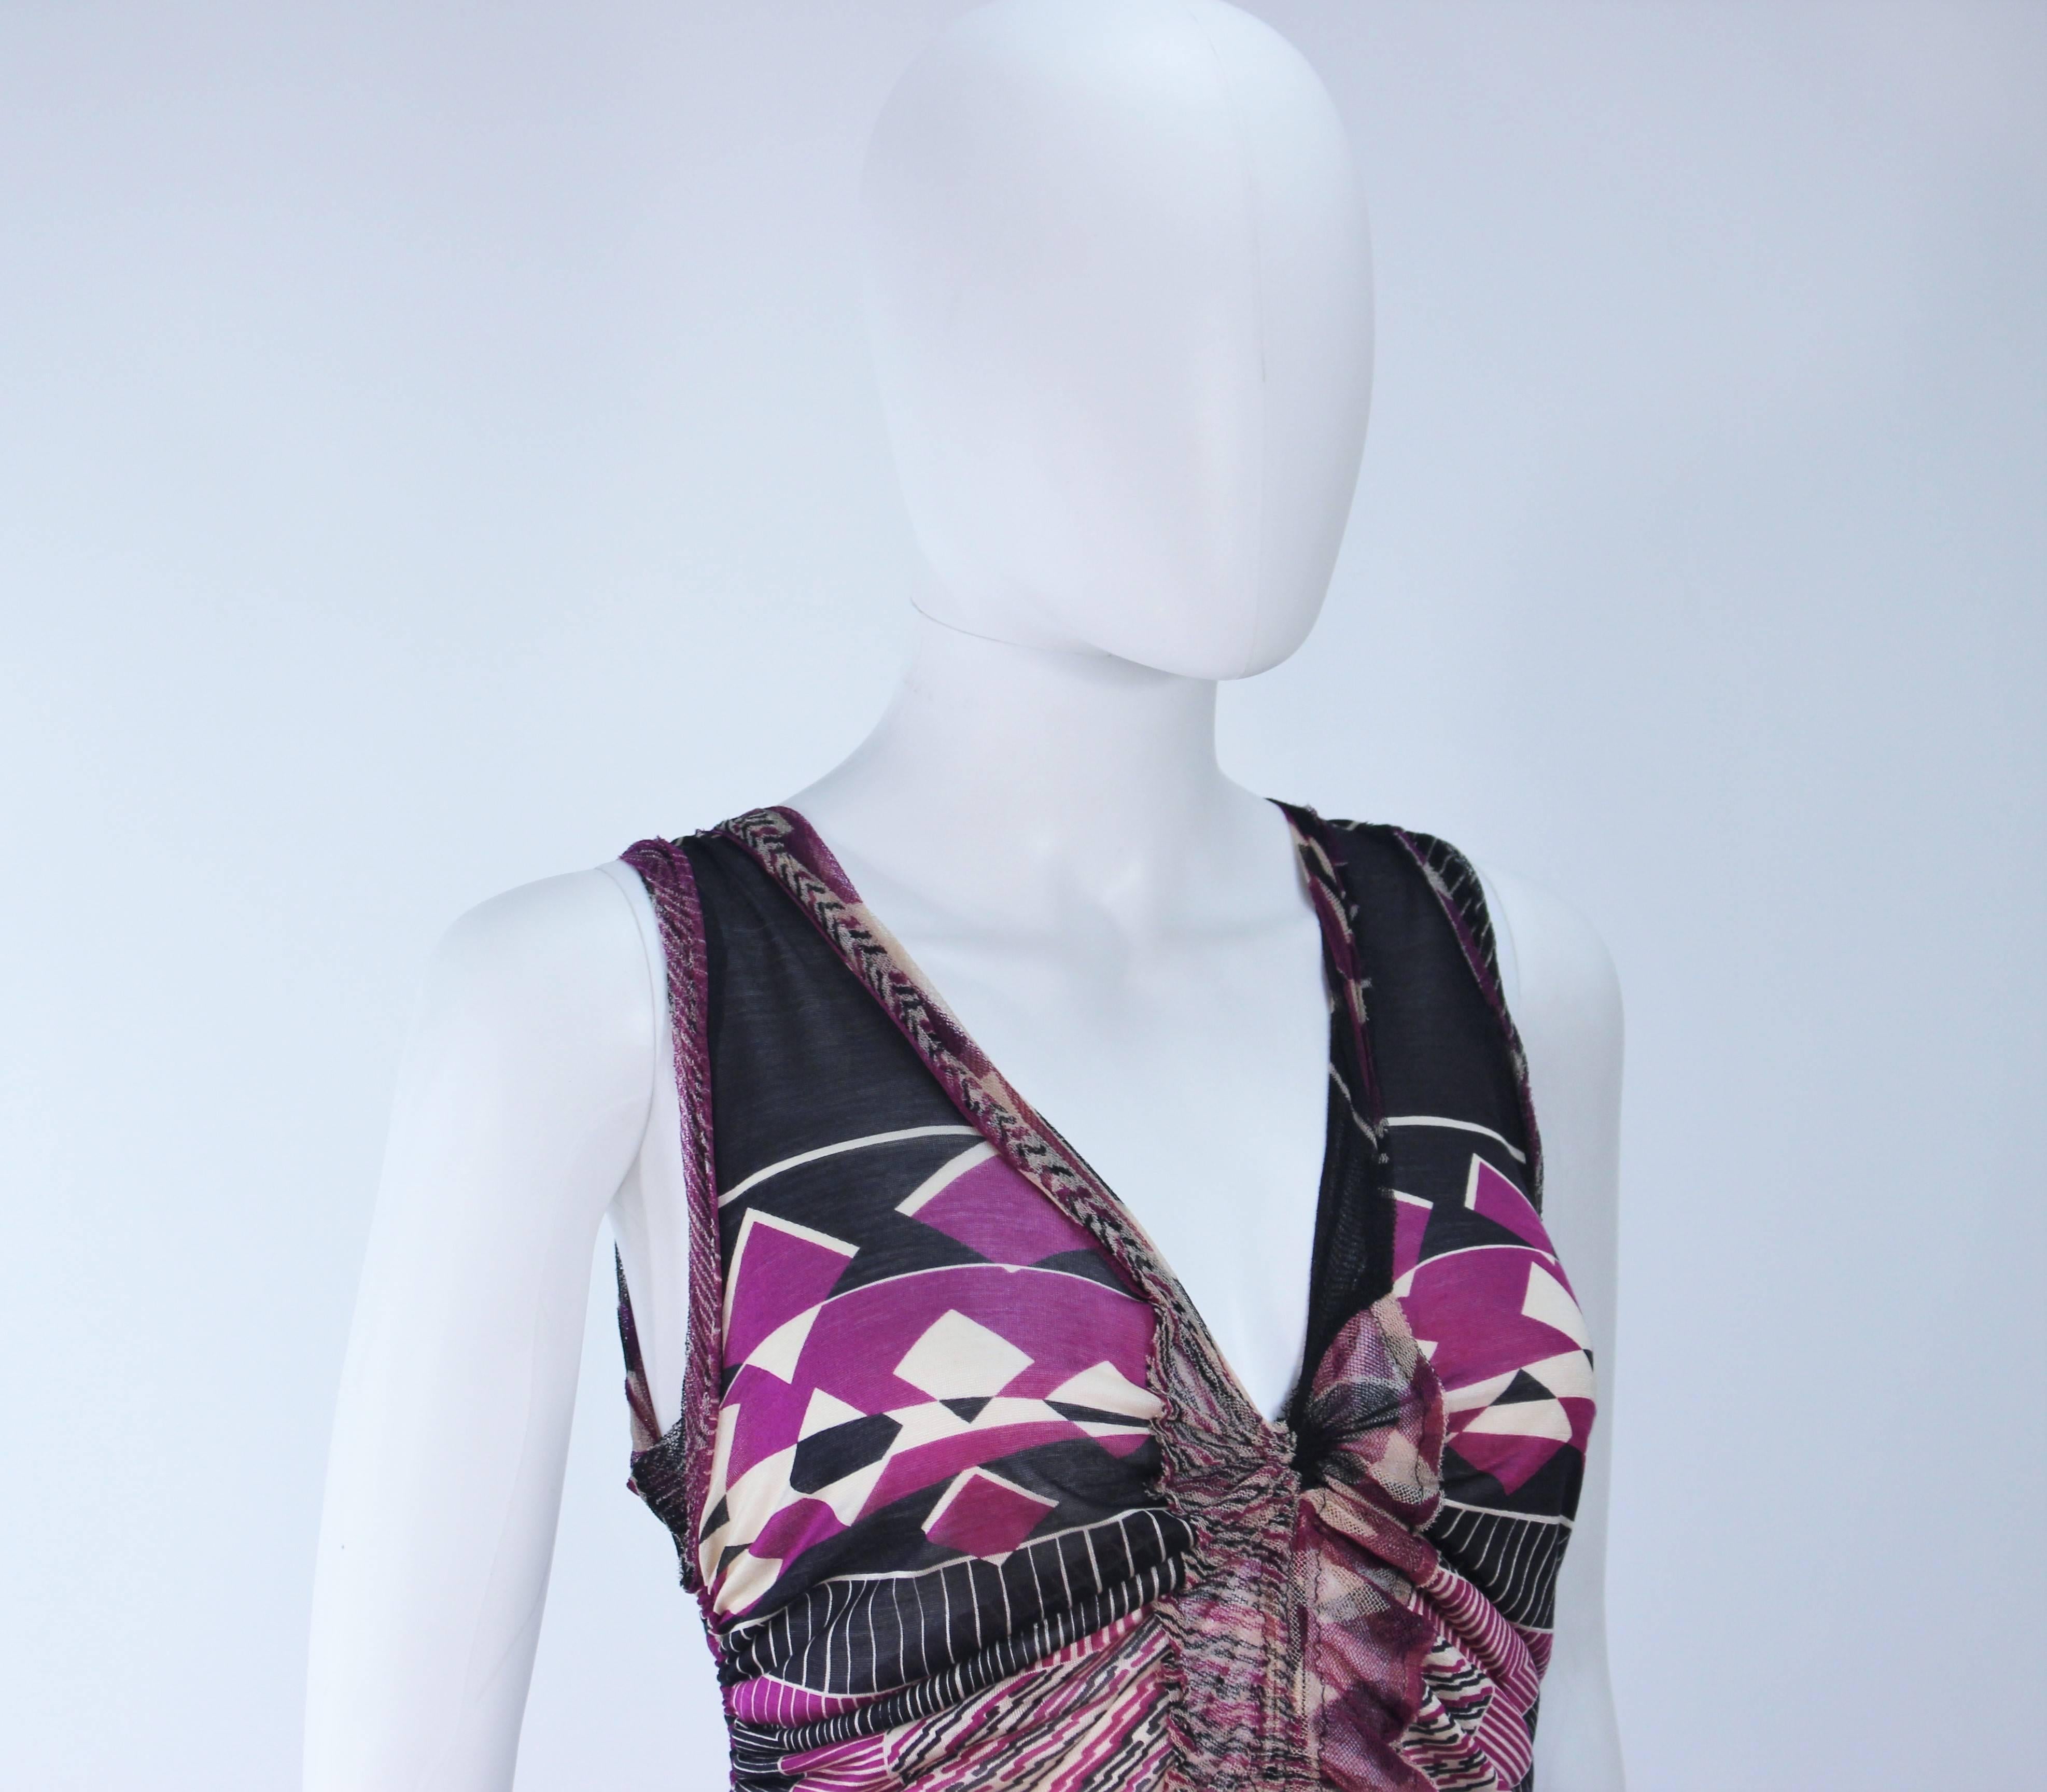 JEAN PAUL GAULTIER Sheer Pink and Black Geometric Pattern Cocktail Dress Size M 2